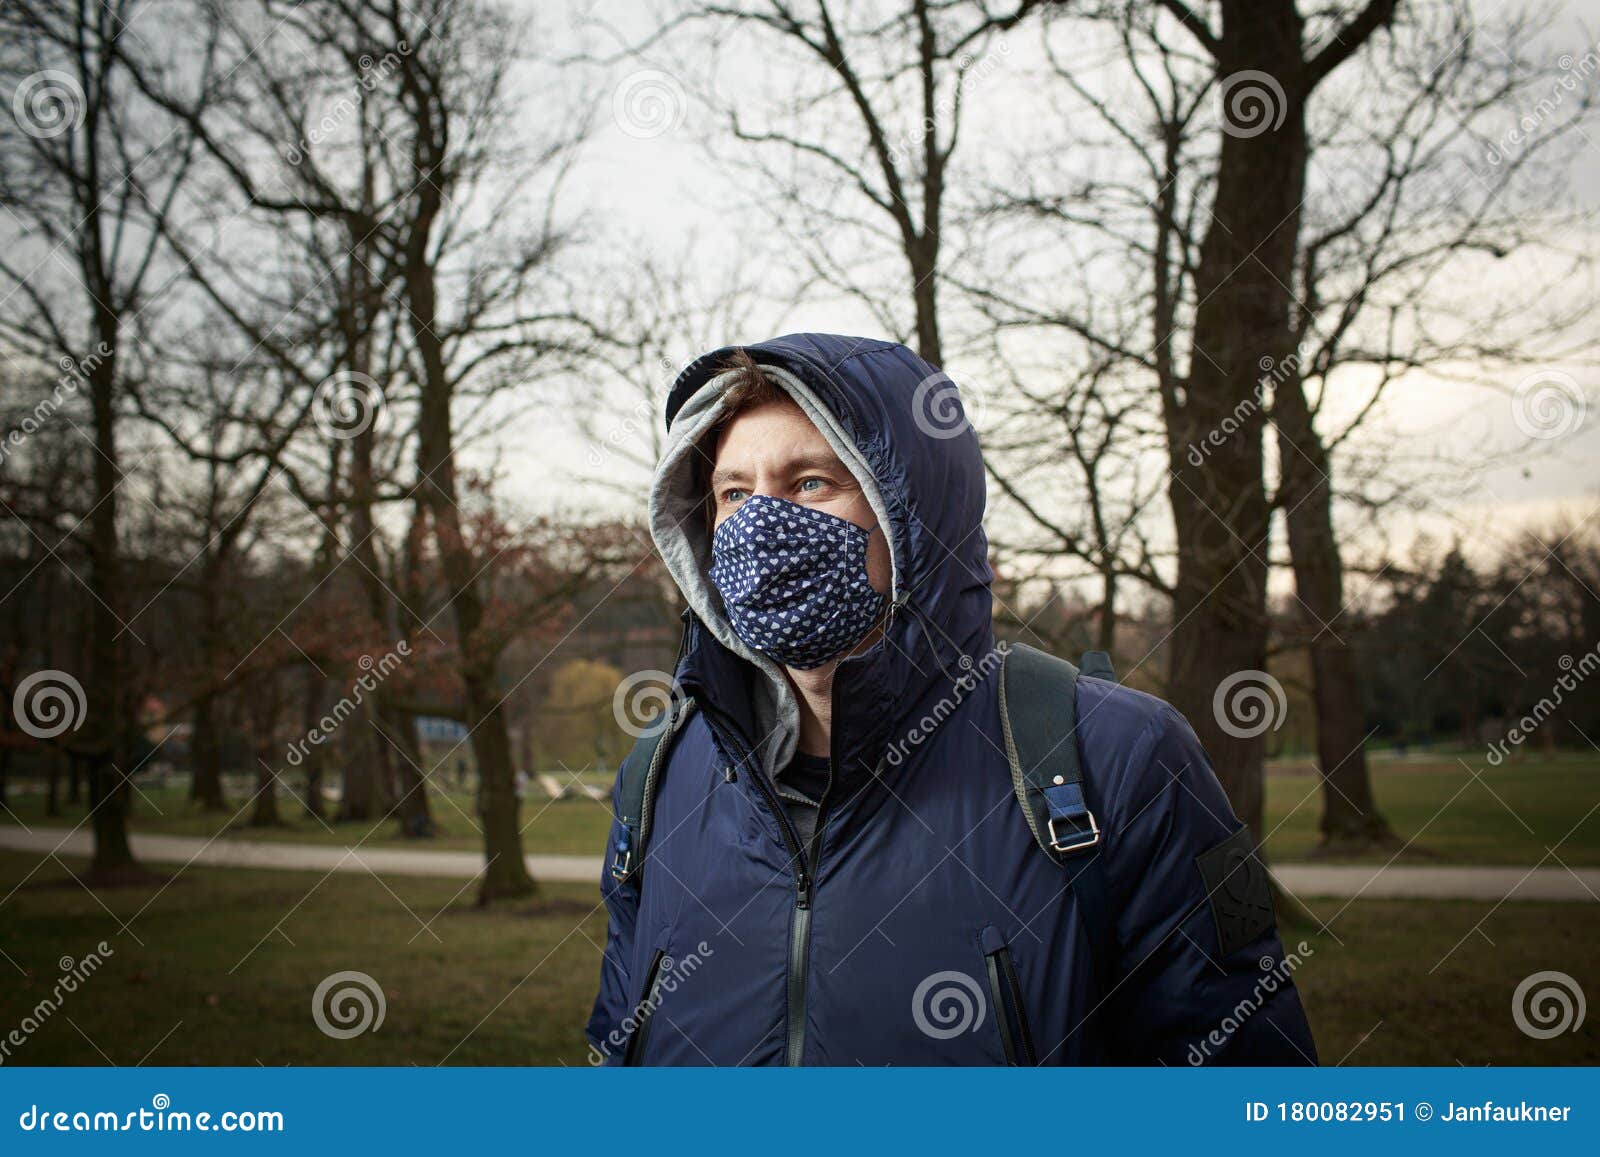 young man with the textil mask